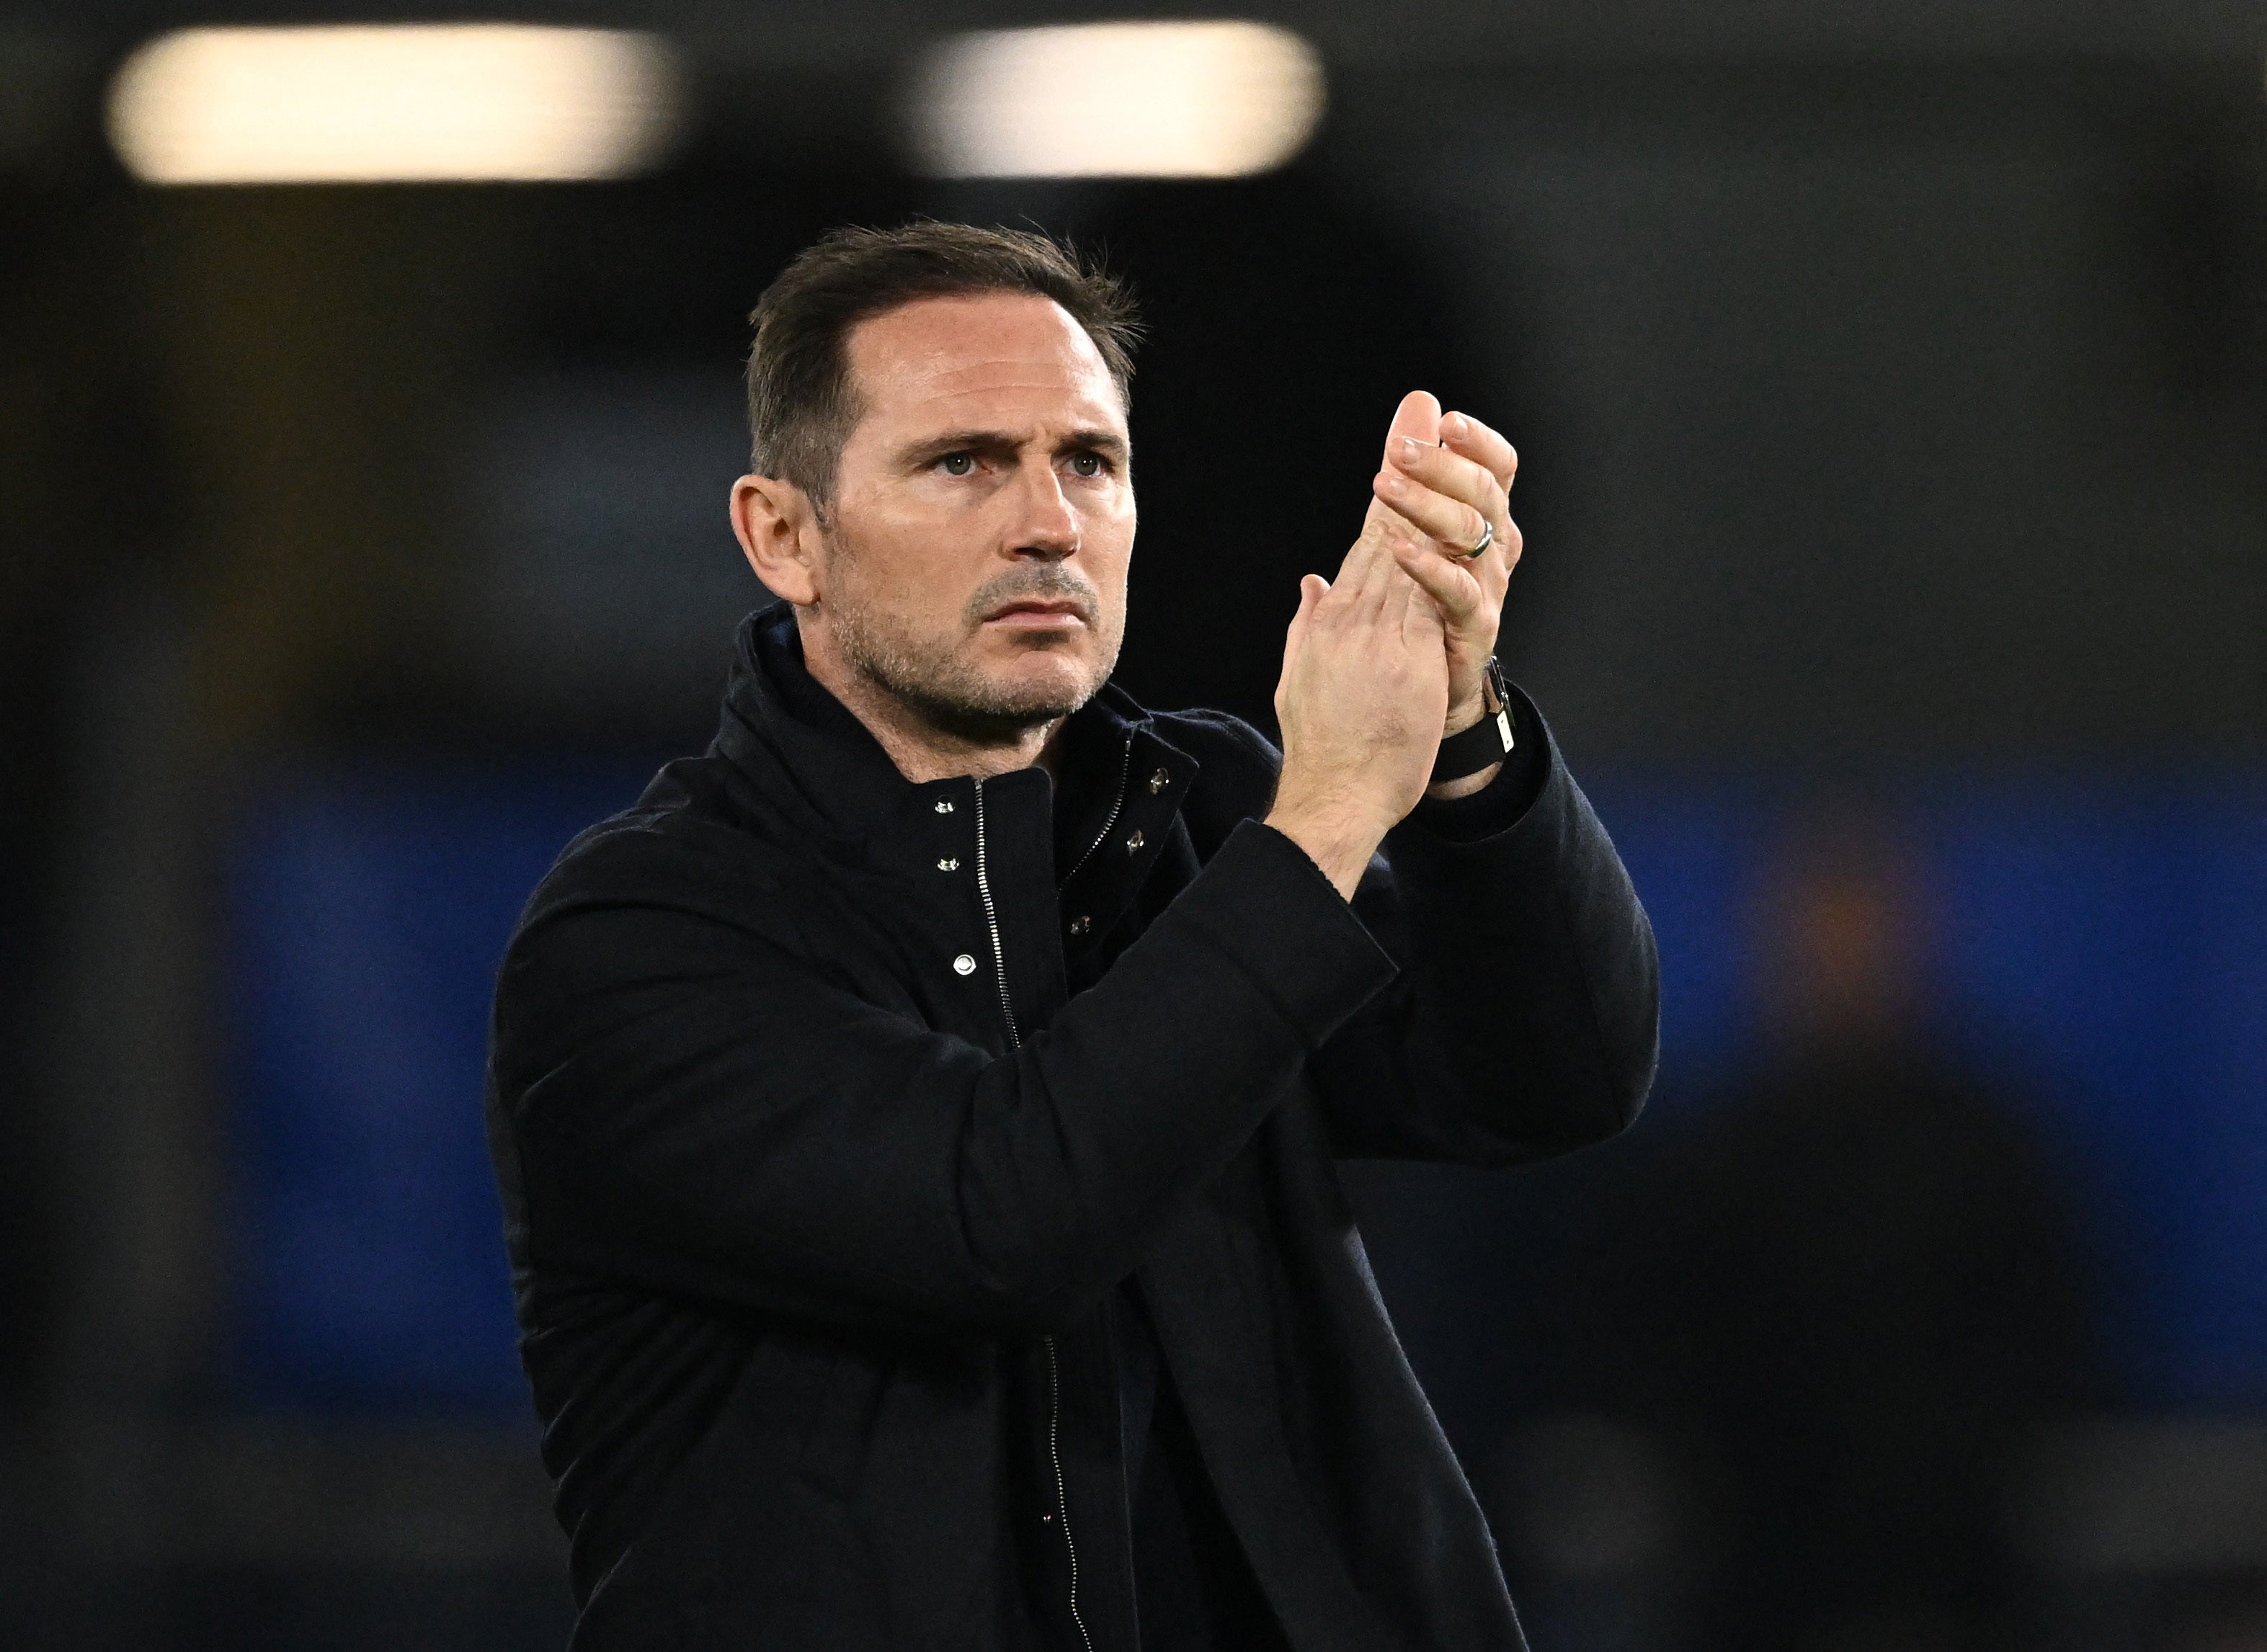 Frank Lampard is yet to register a win on his return to Chelsea